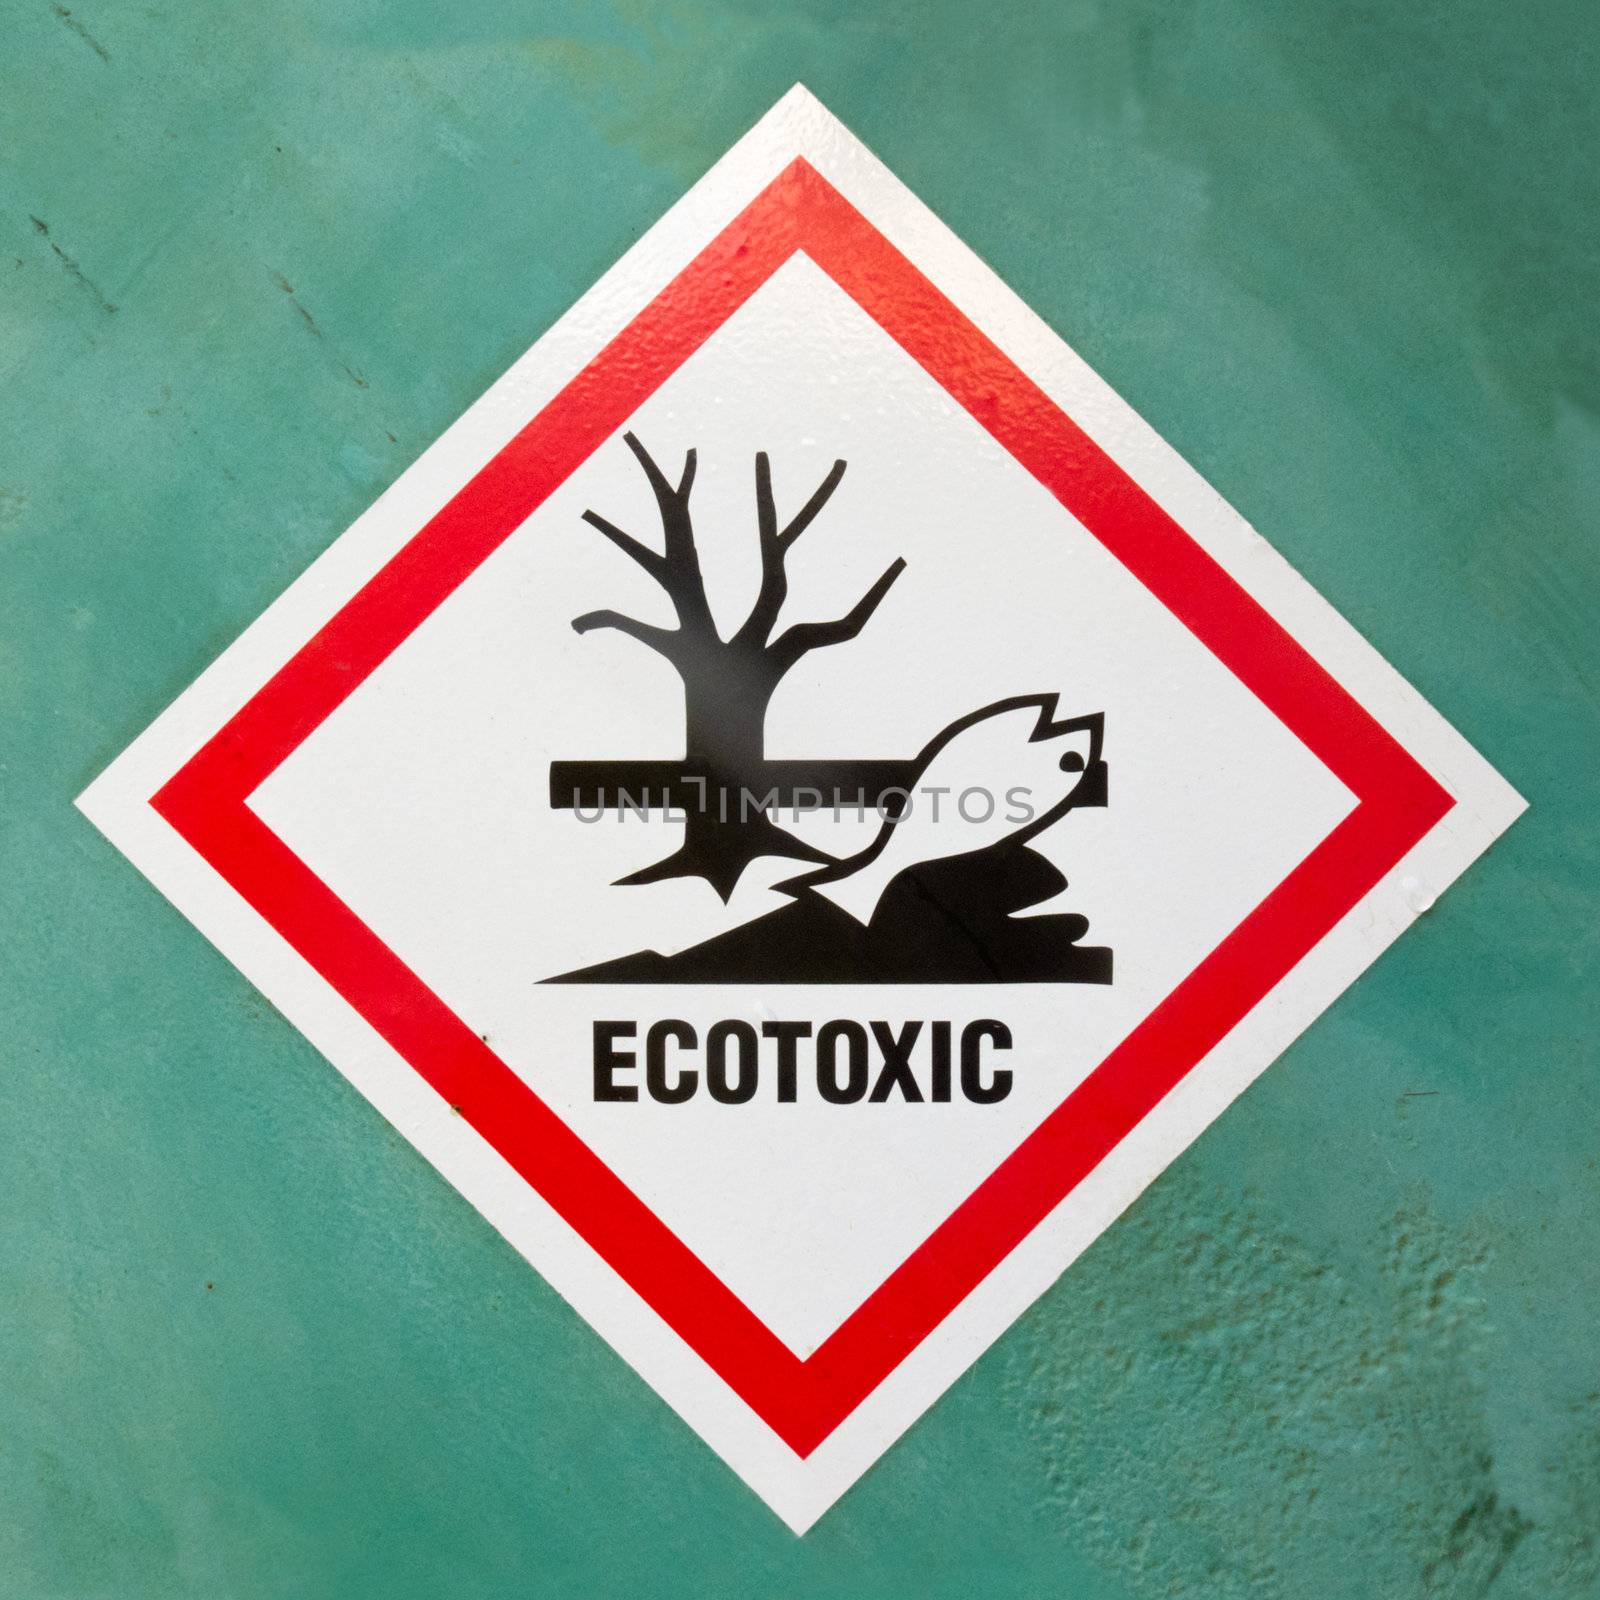 Dangerous for the environment hazard symbol or ecotoxic warning sign on a painted wall warning of lethal consequences to plant and animal life due to toxicity